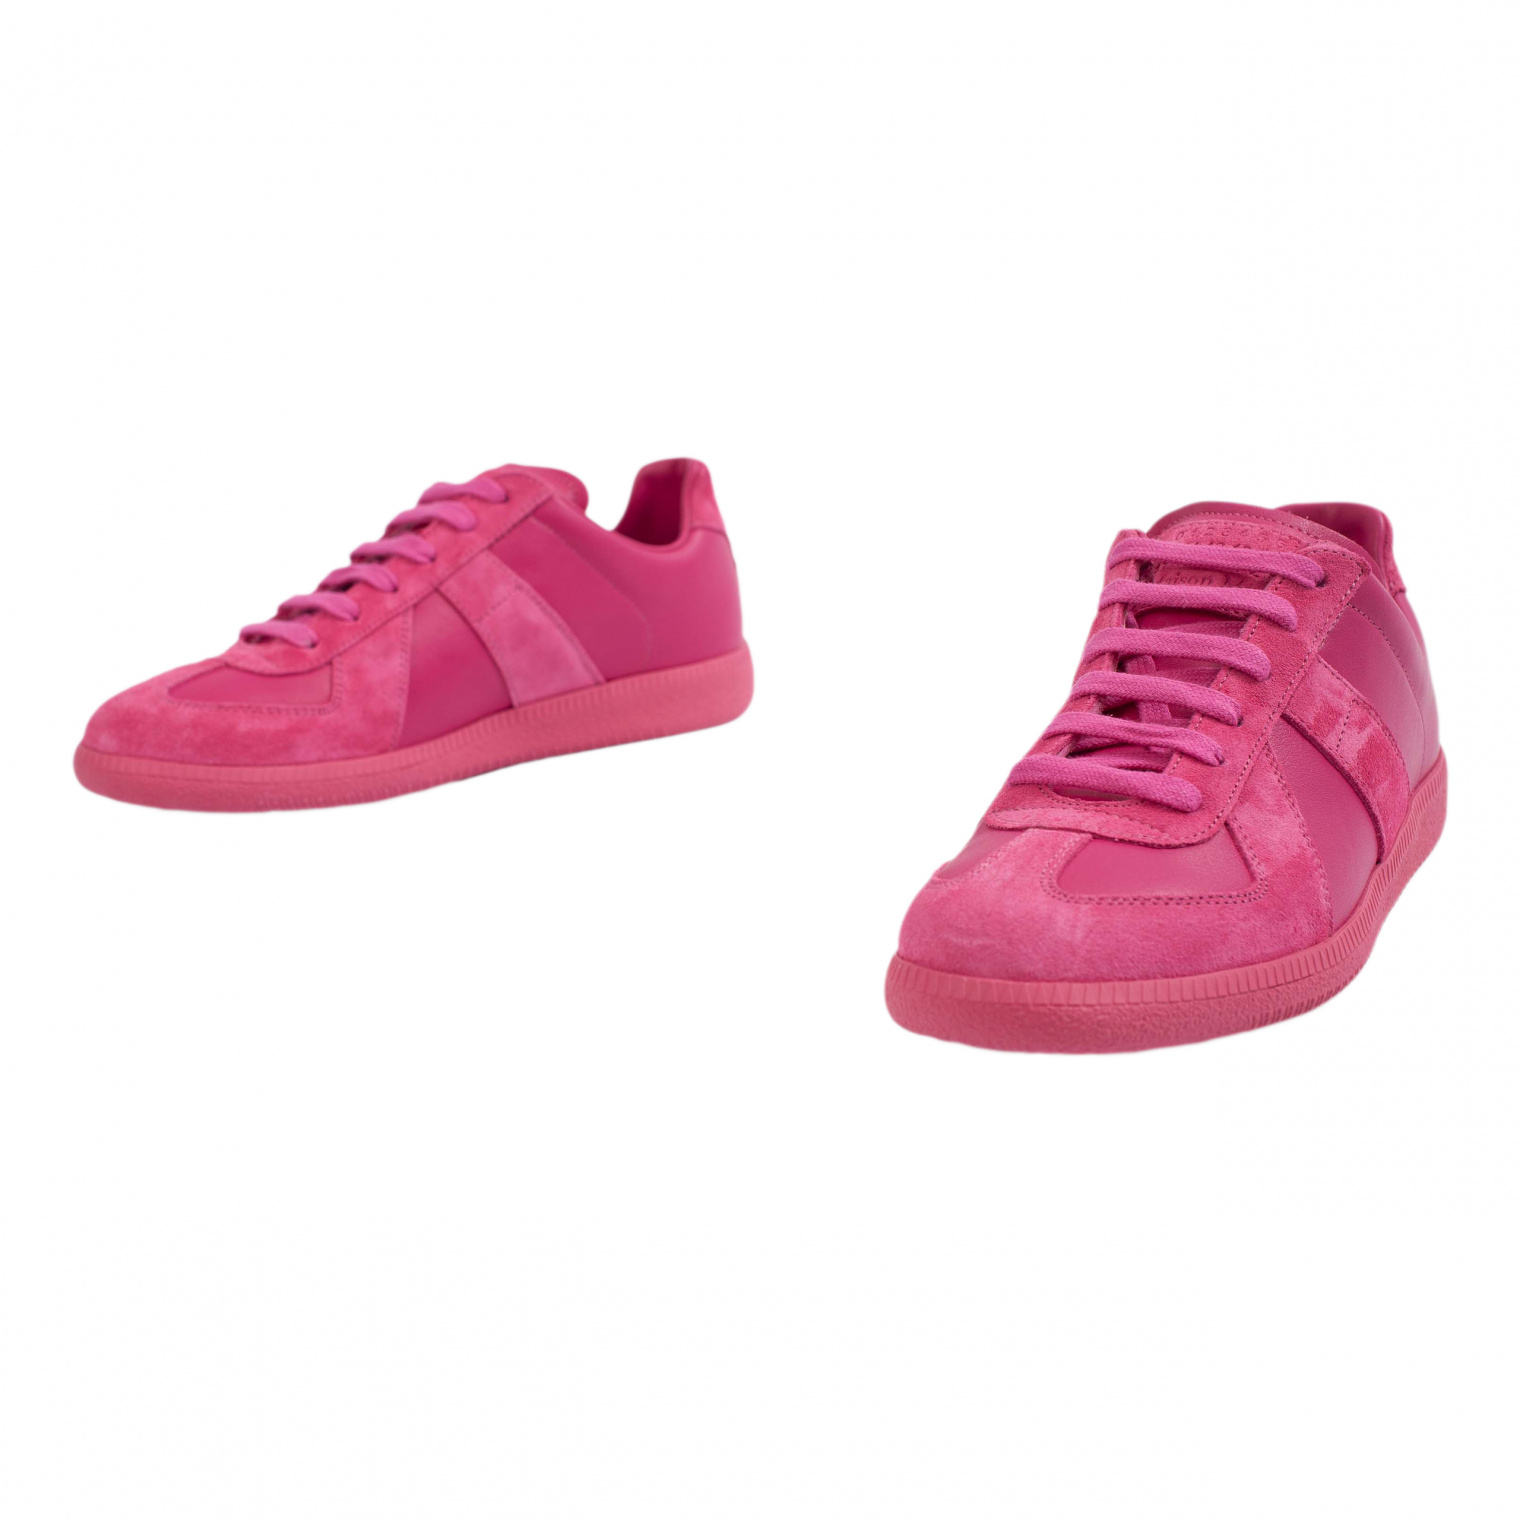 Maison Margiela Pink Leather Replica Sneakers